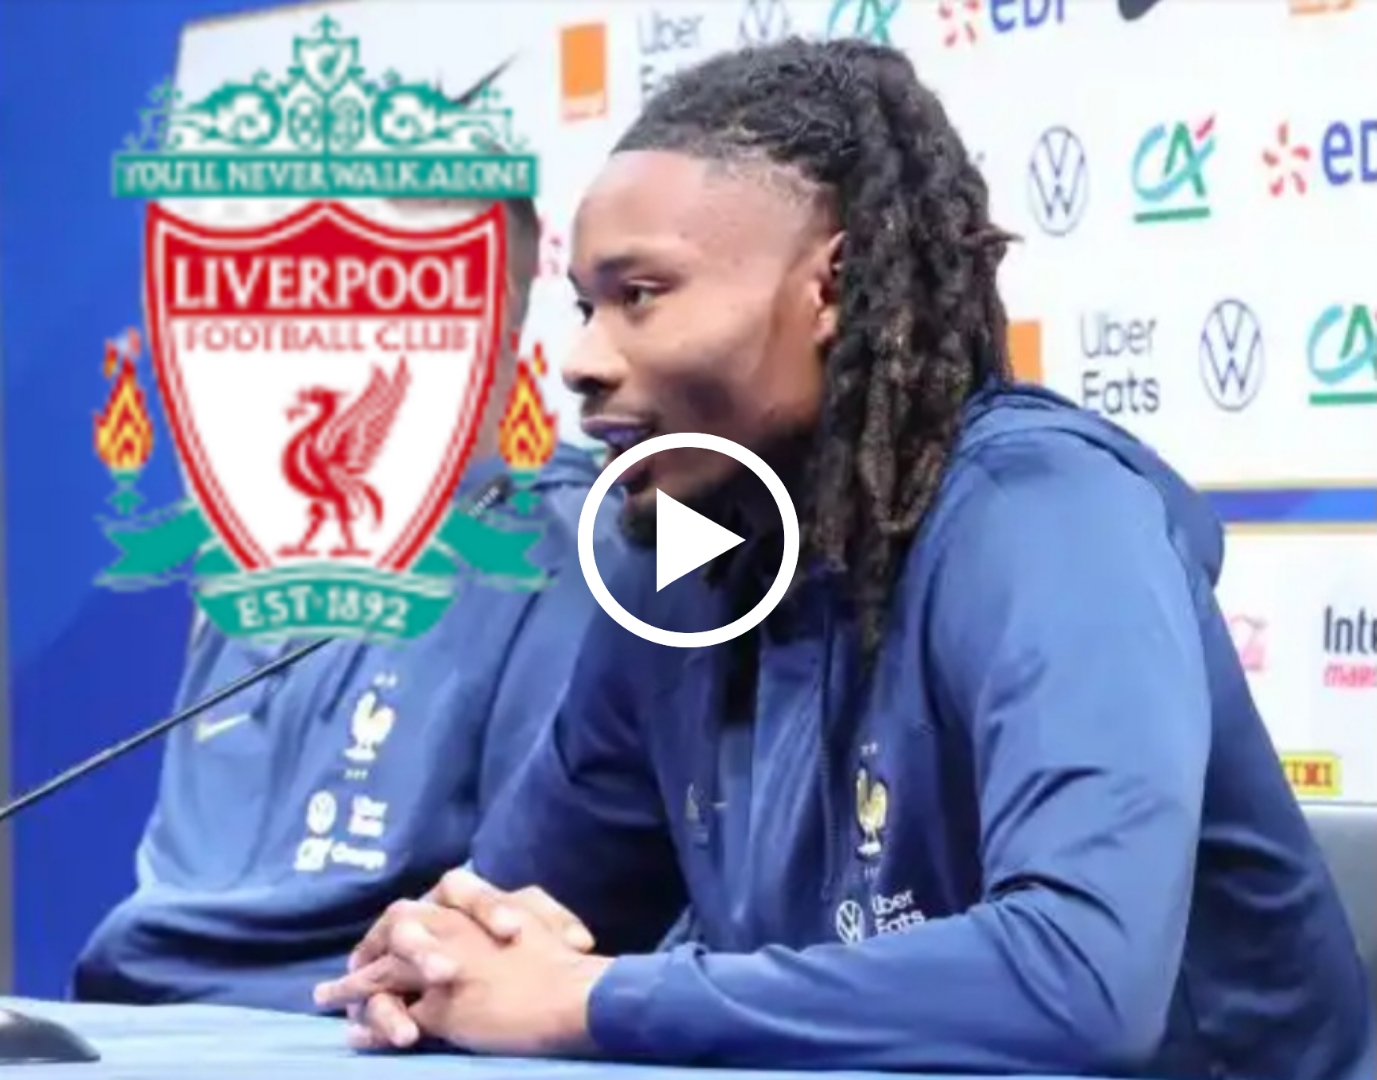 "I want to join Liverpool" 22-year-old star player demands Liverpool move, but deal is on ‘standby’ at the moment as negotiation continues 1 Sportelo